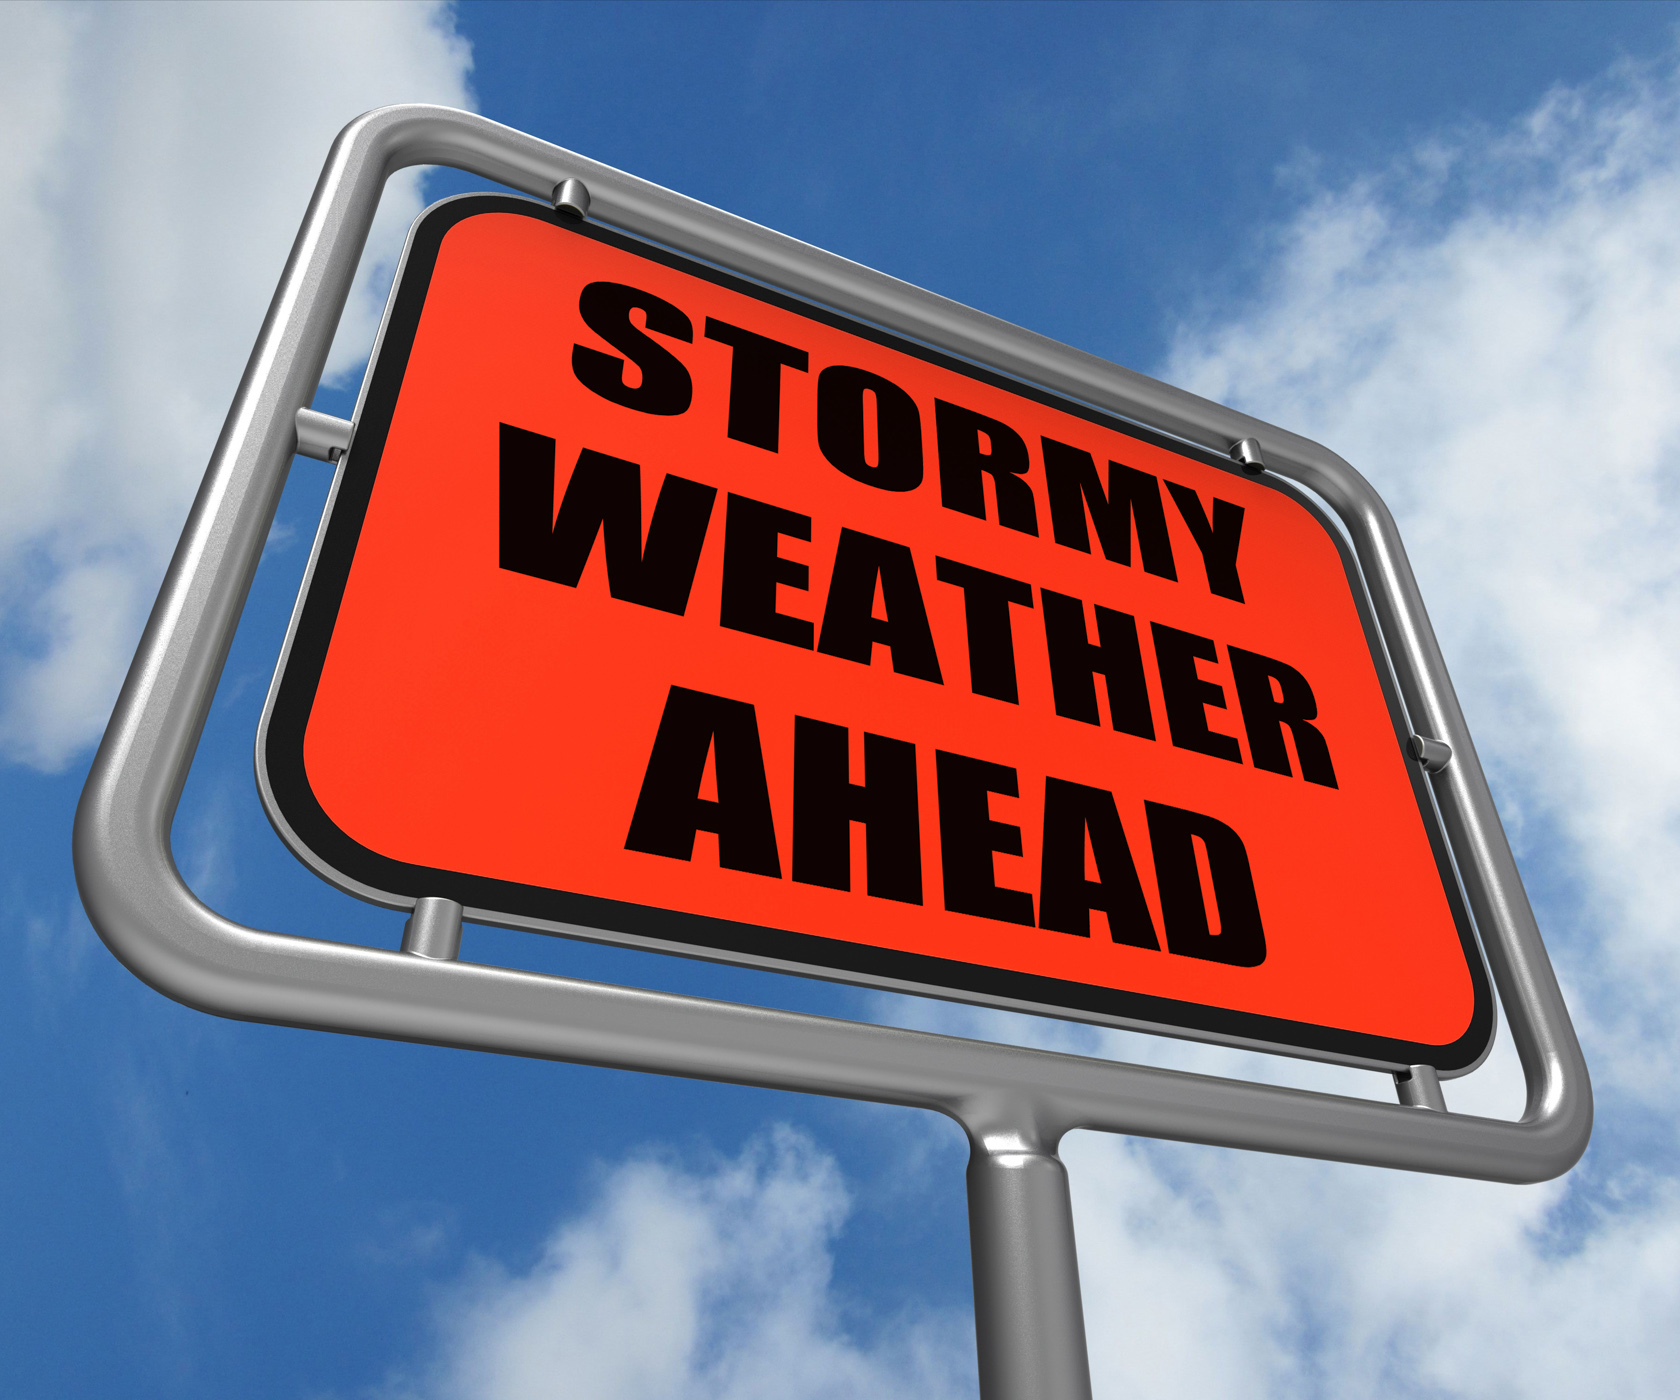 Stormy weather ahead sign shows storm warning or danger photo